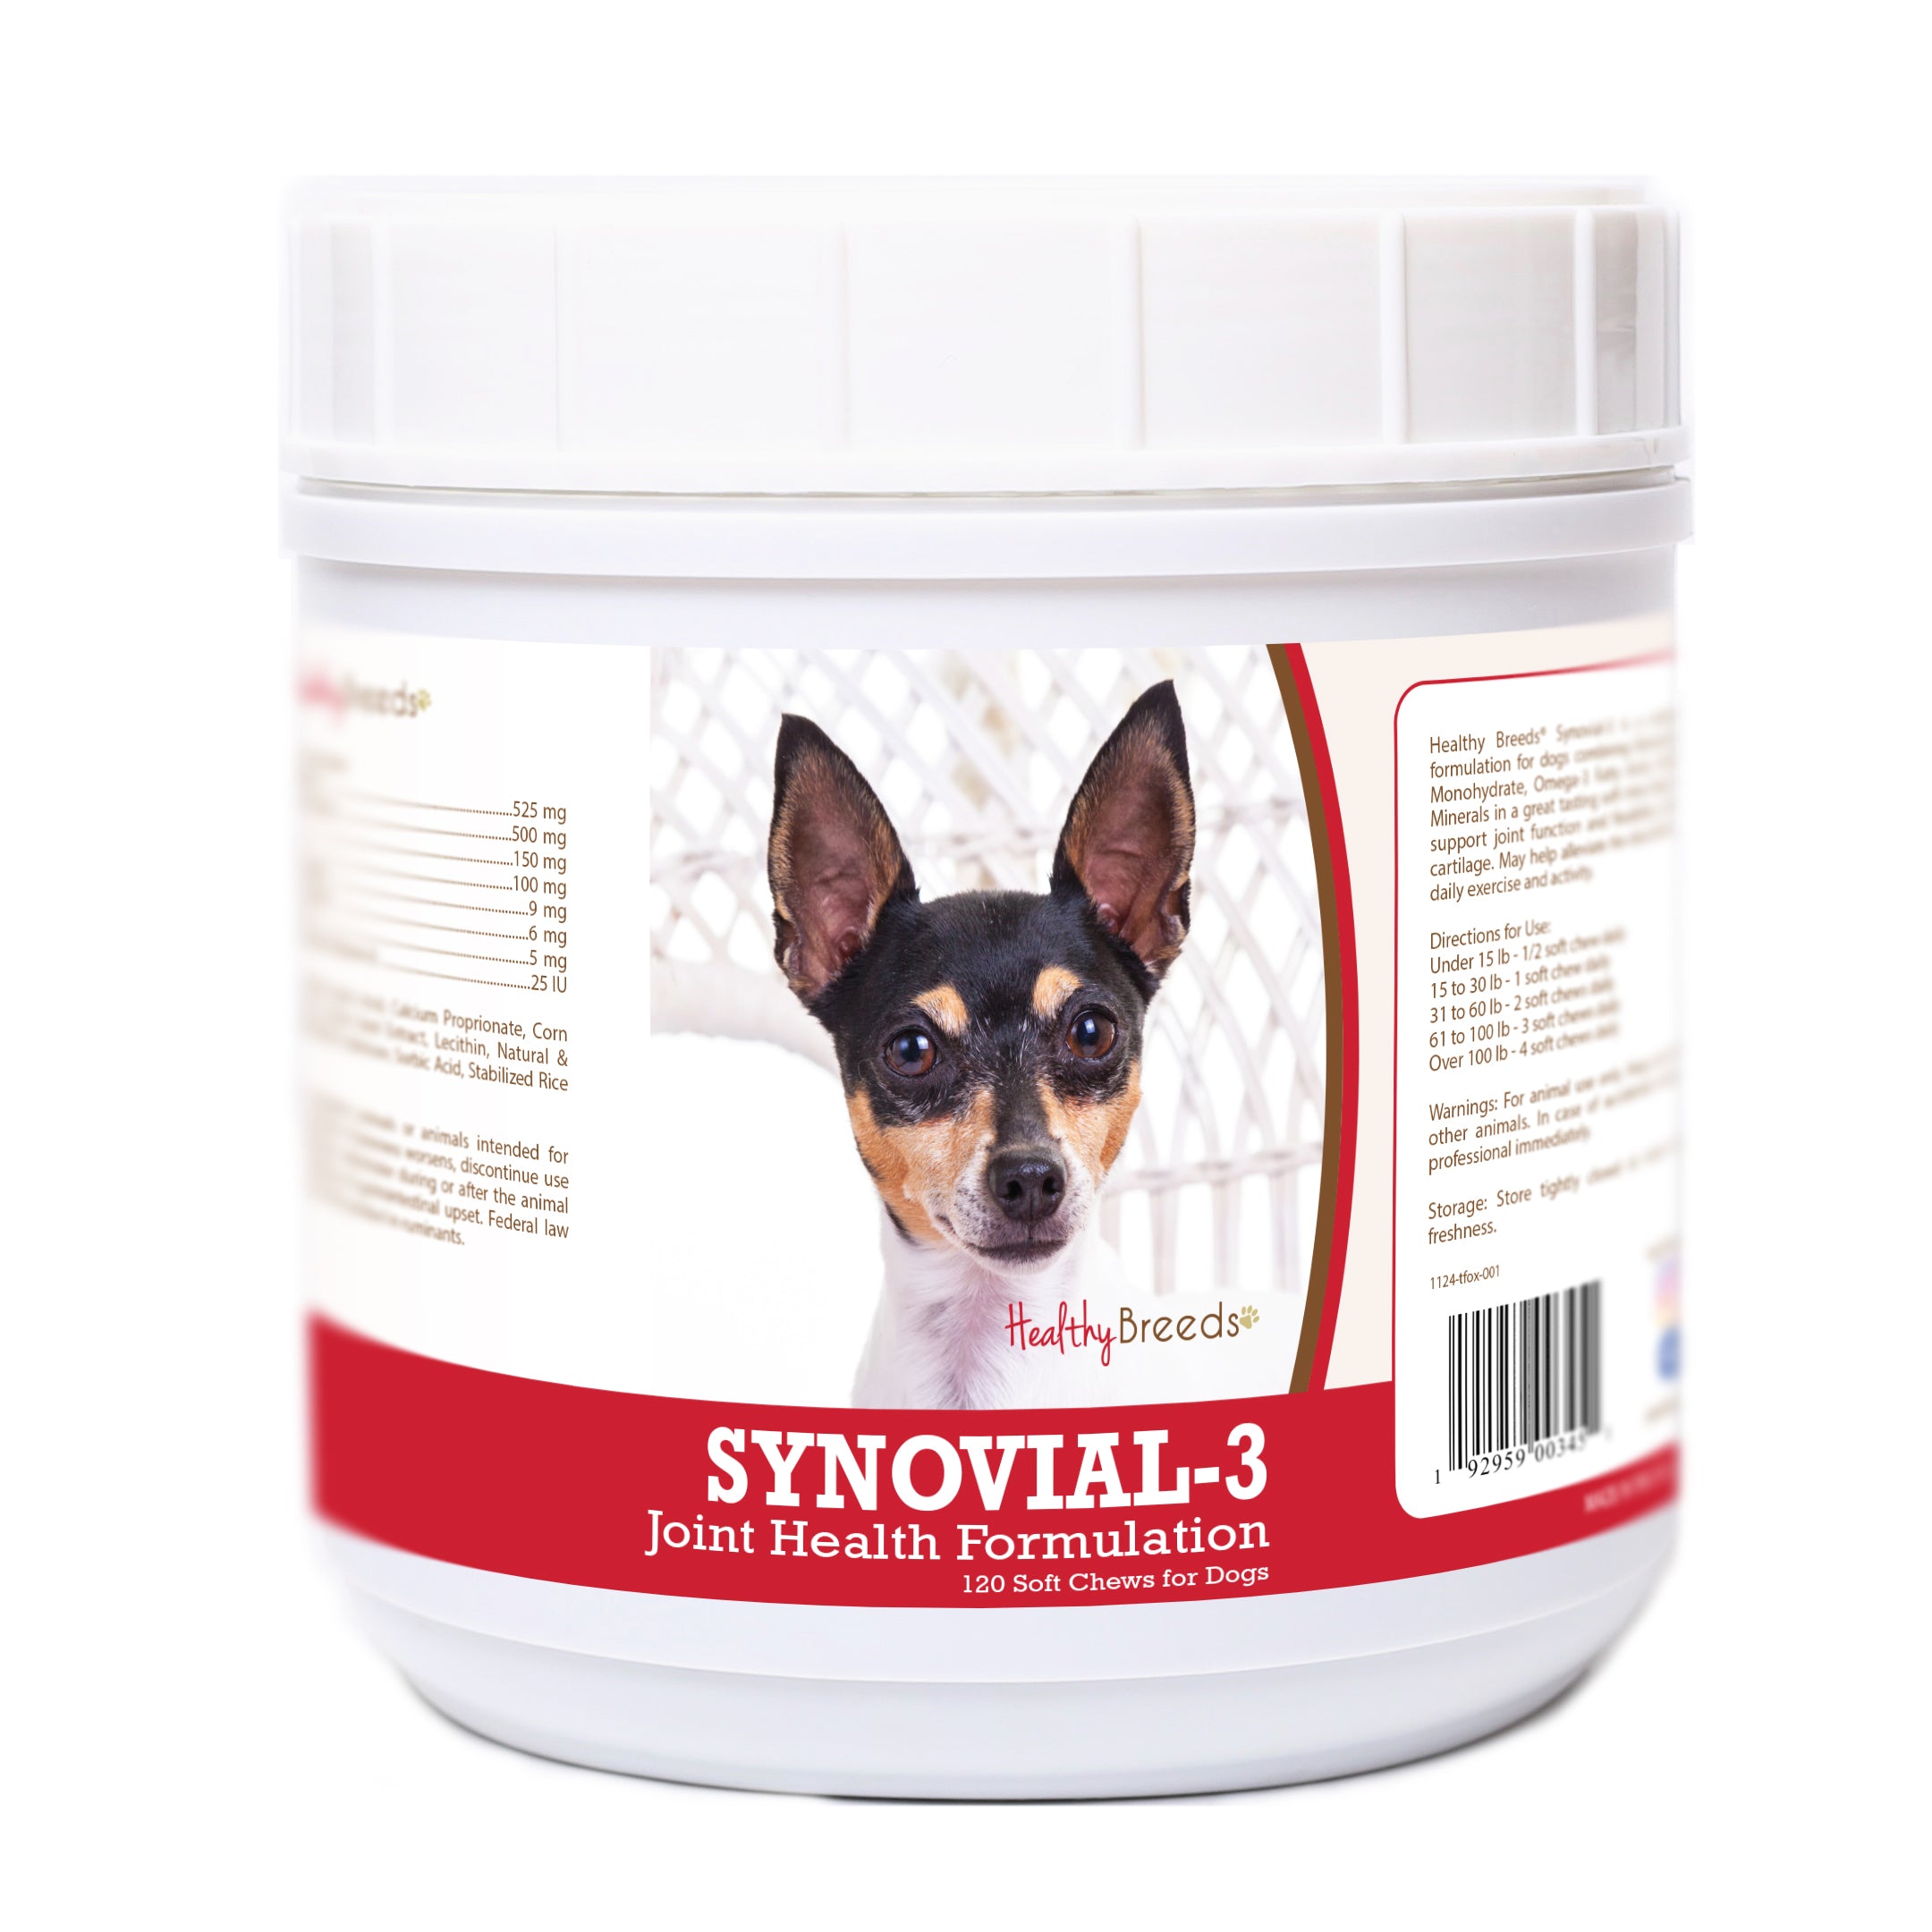 Toy Fox Terrier Synovial-3 Joint Health Formulation Soft Chews 120 Count